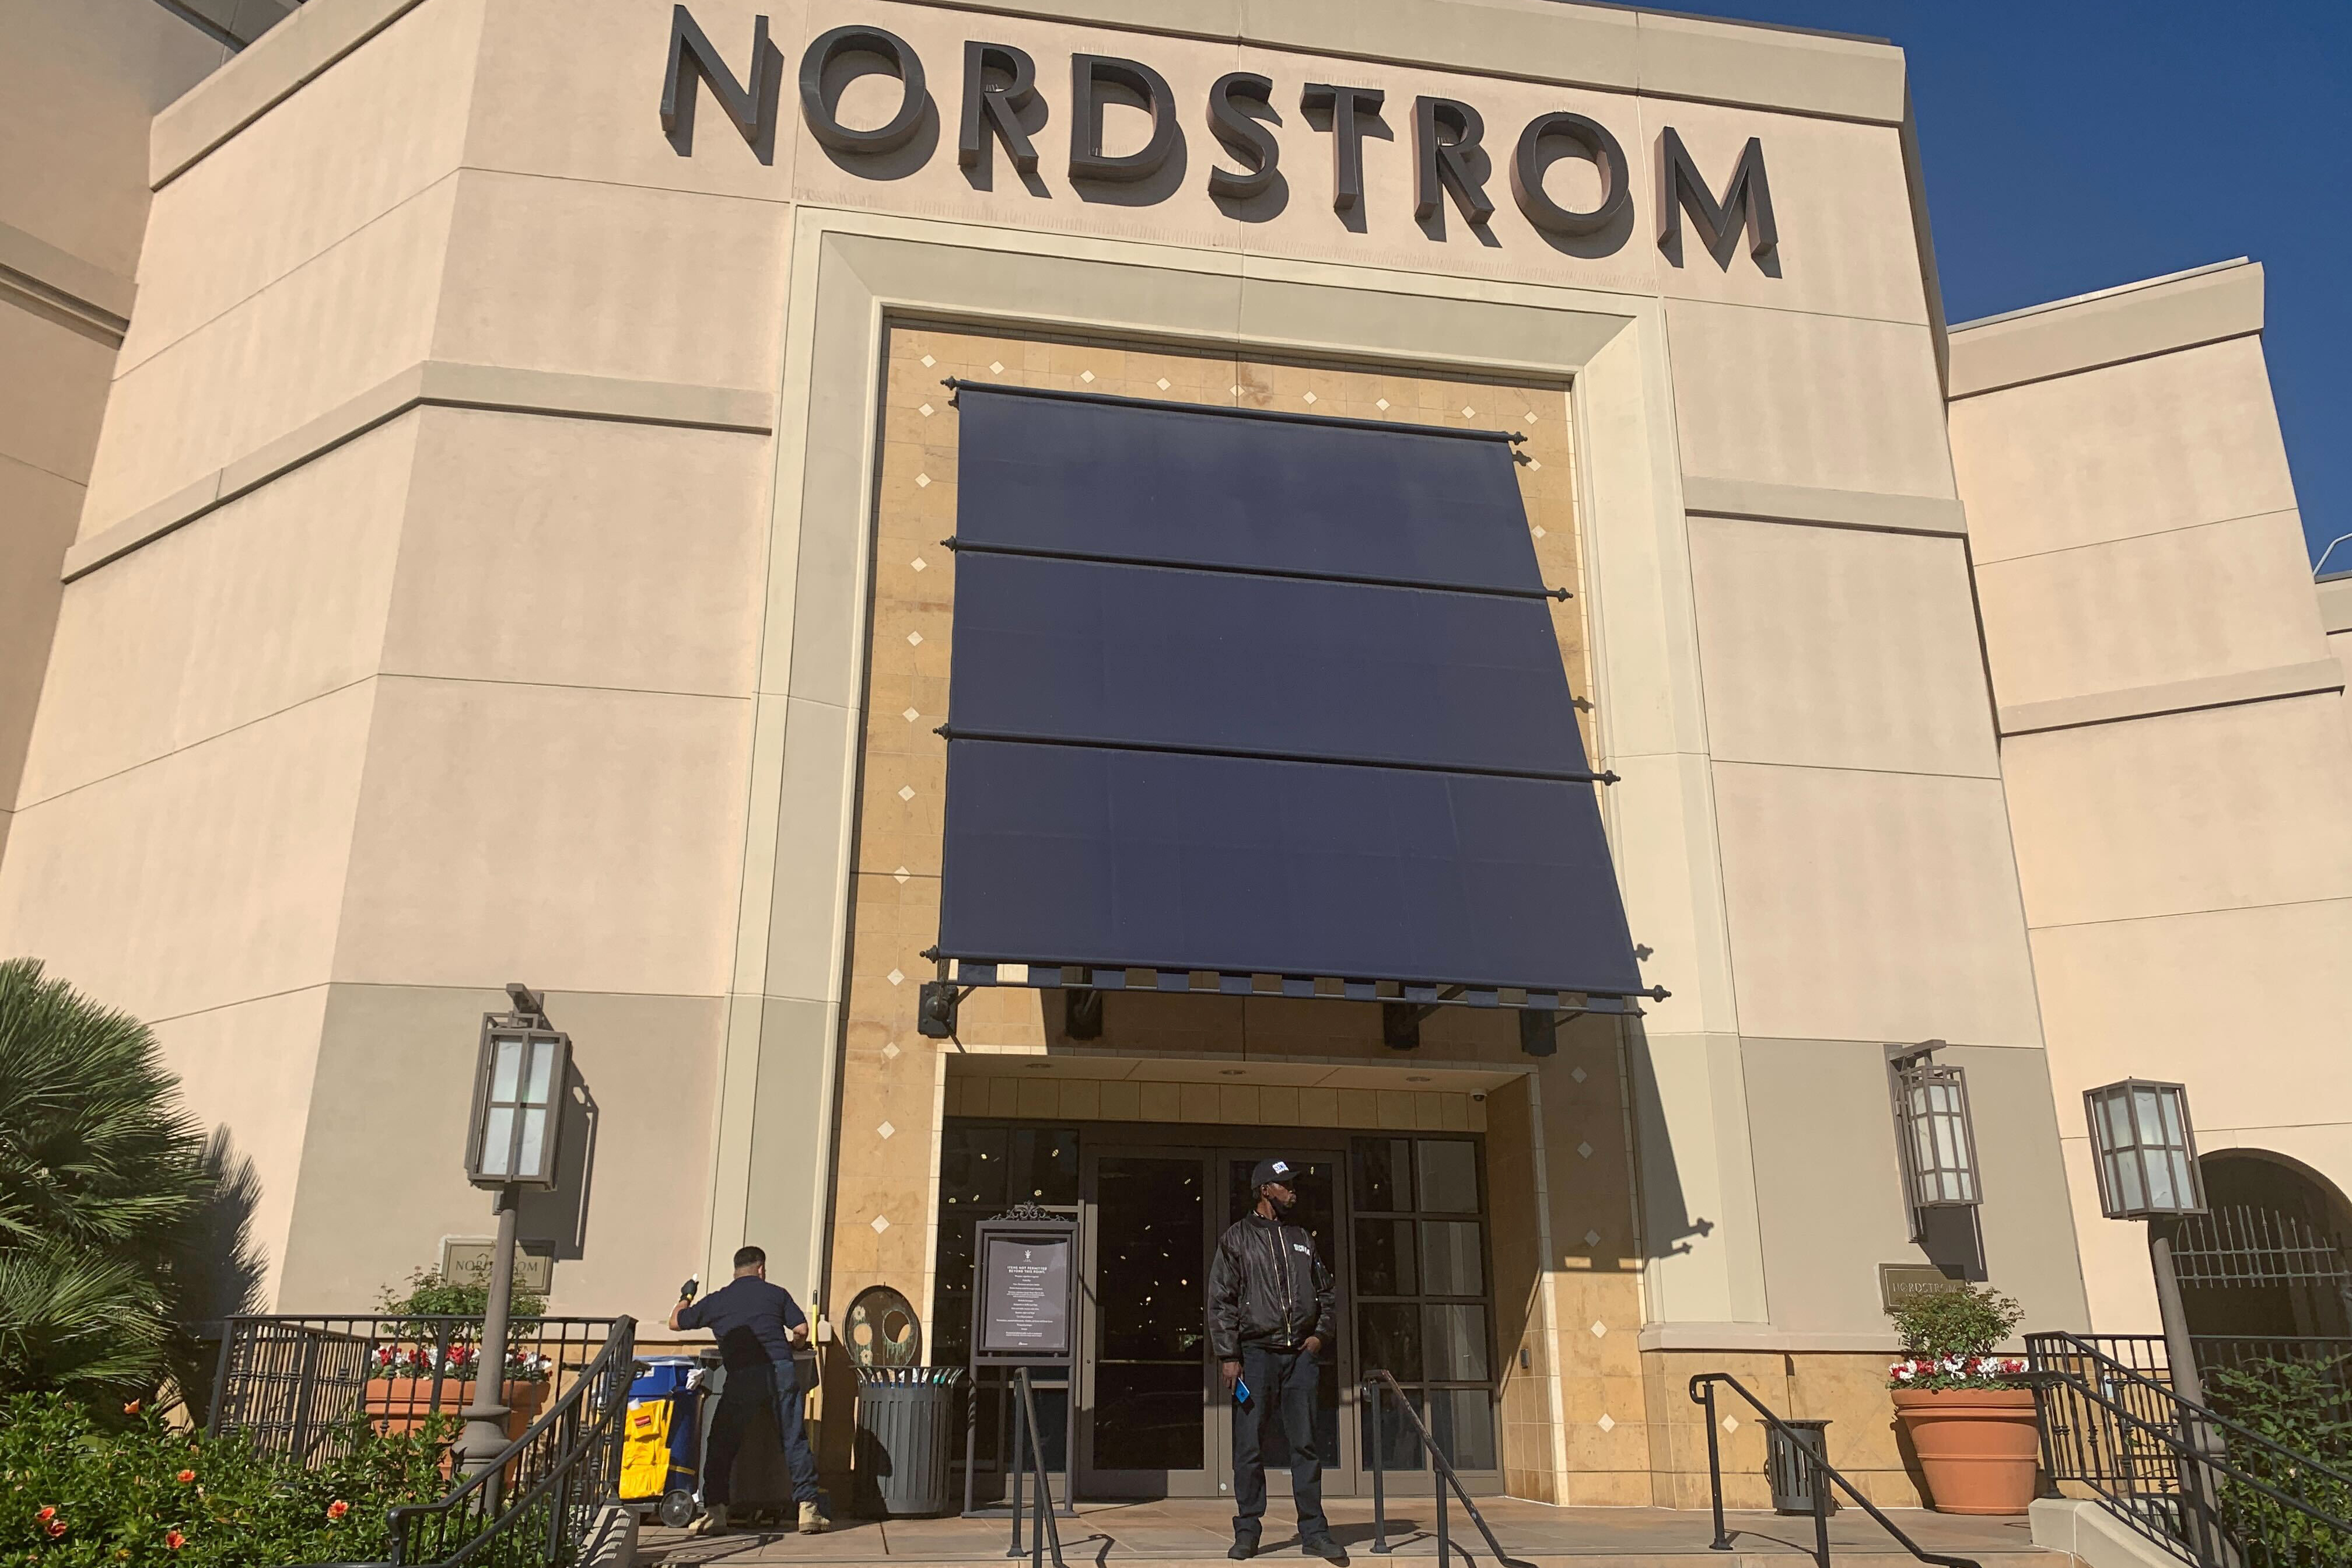 Walnut Creek businesses close up early after Nordstrom theft